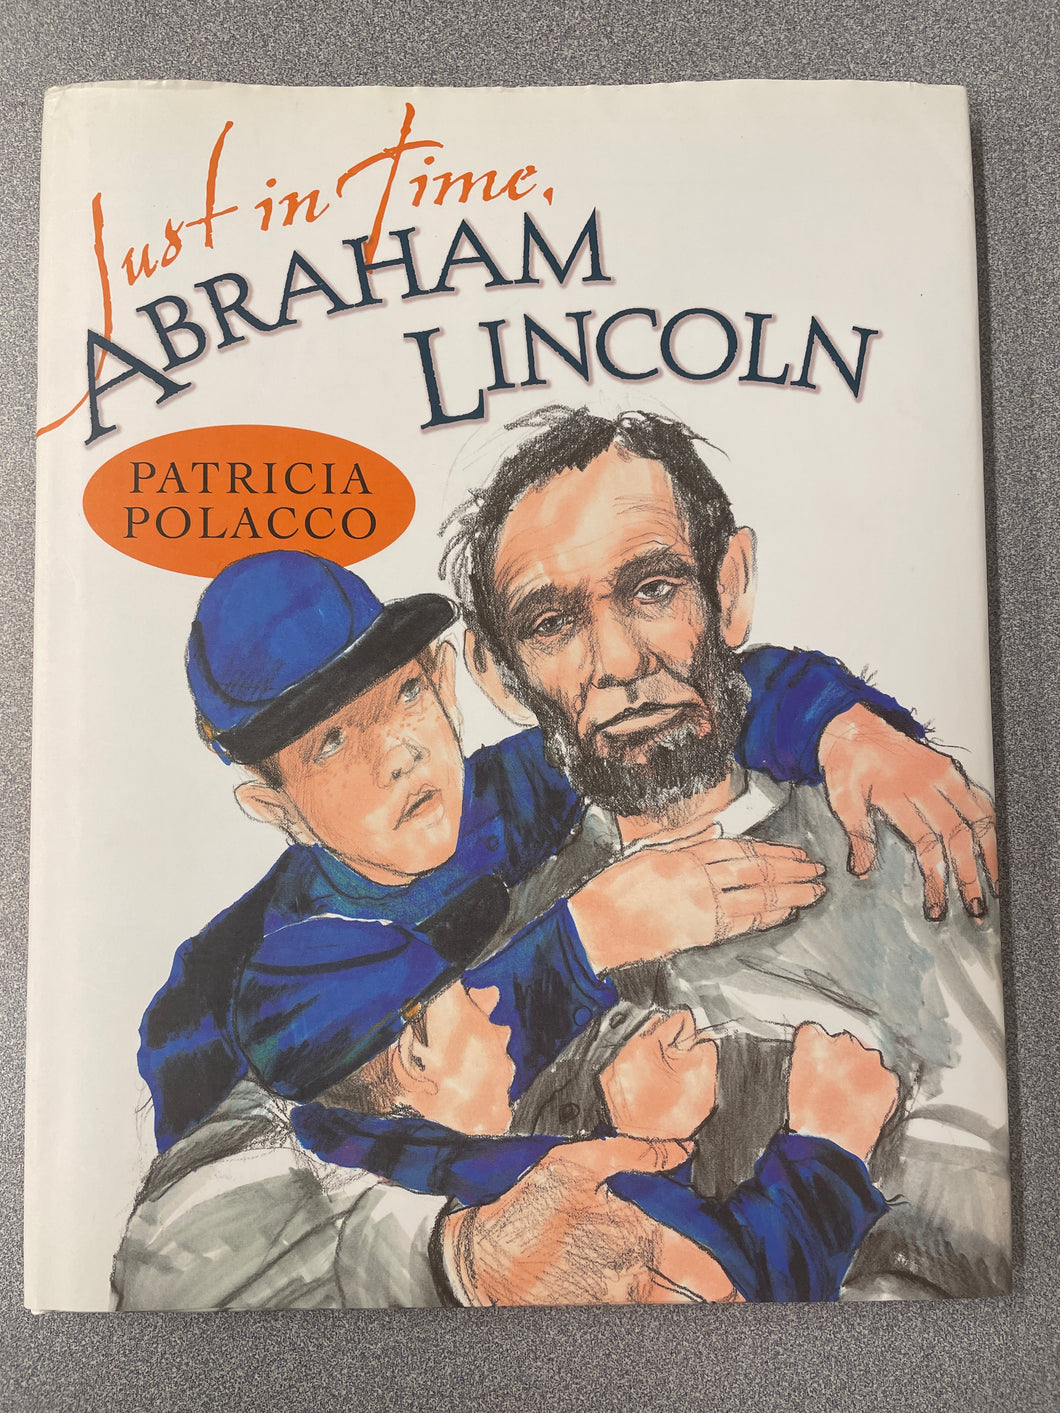 Polacco, Patricia, Just In time, Abraham Lincoln [2011] CP 4/24